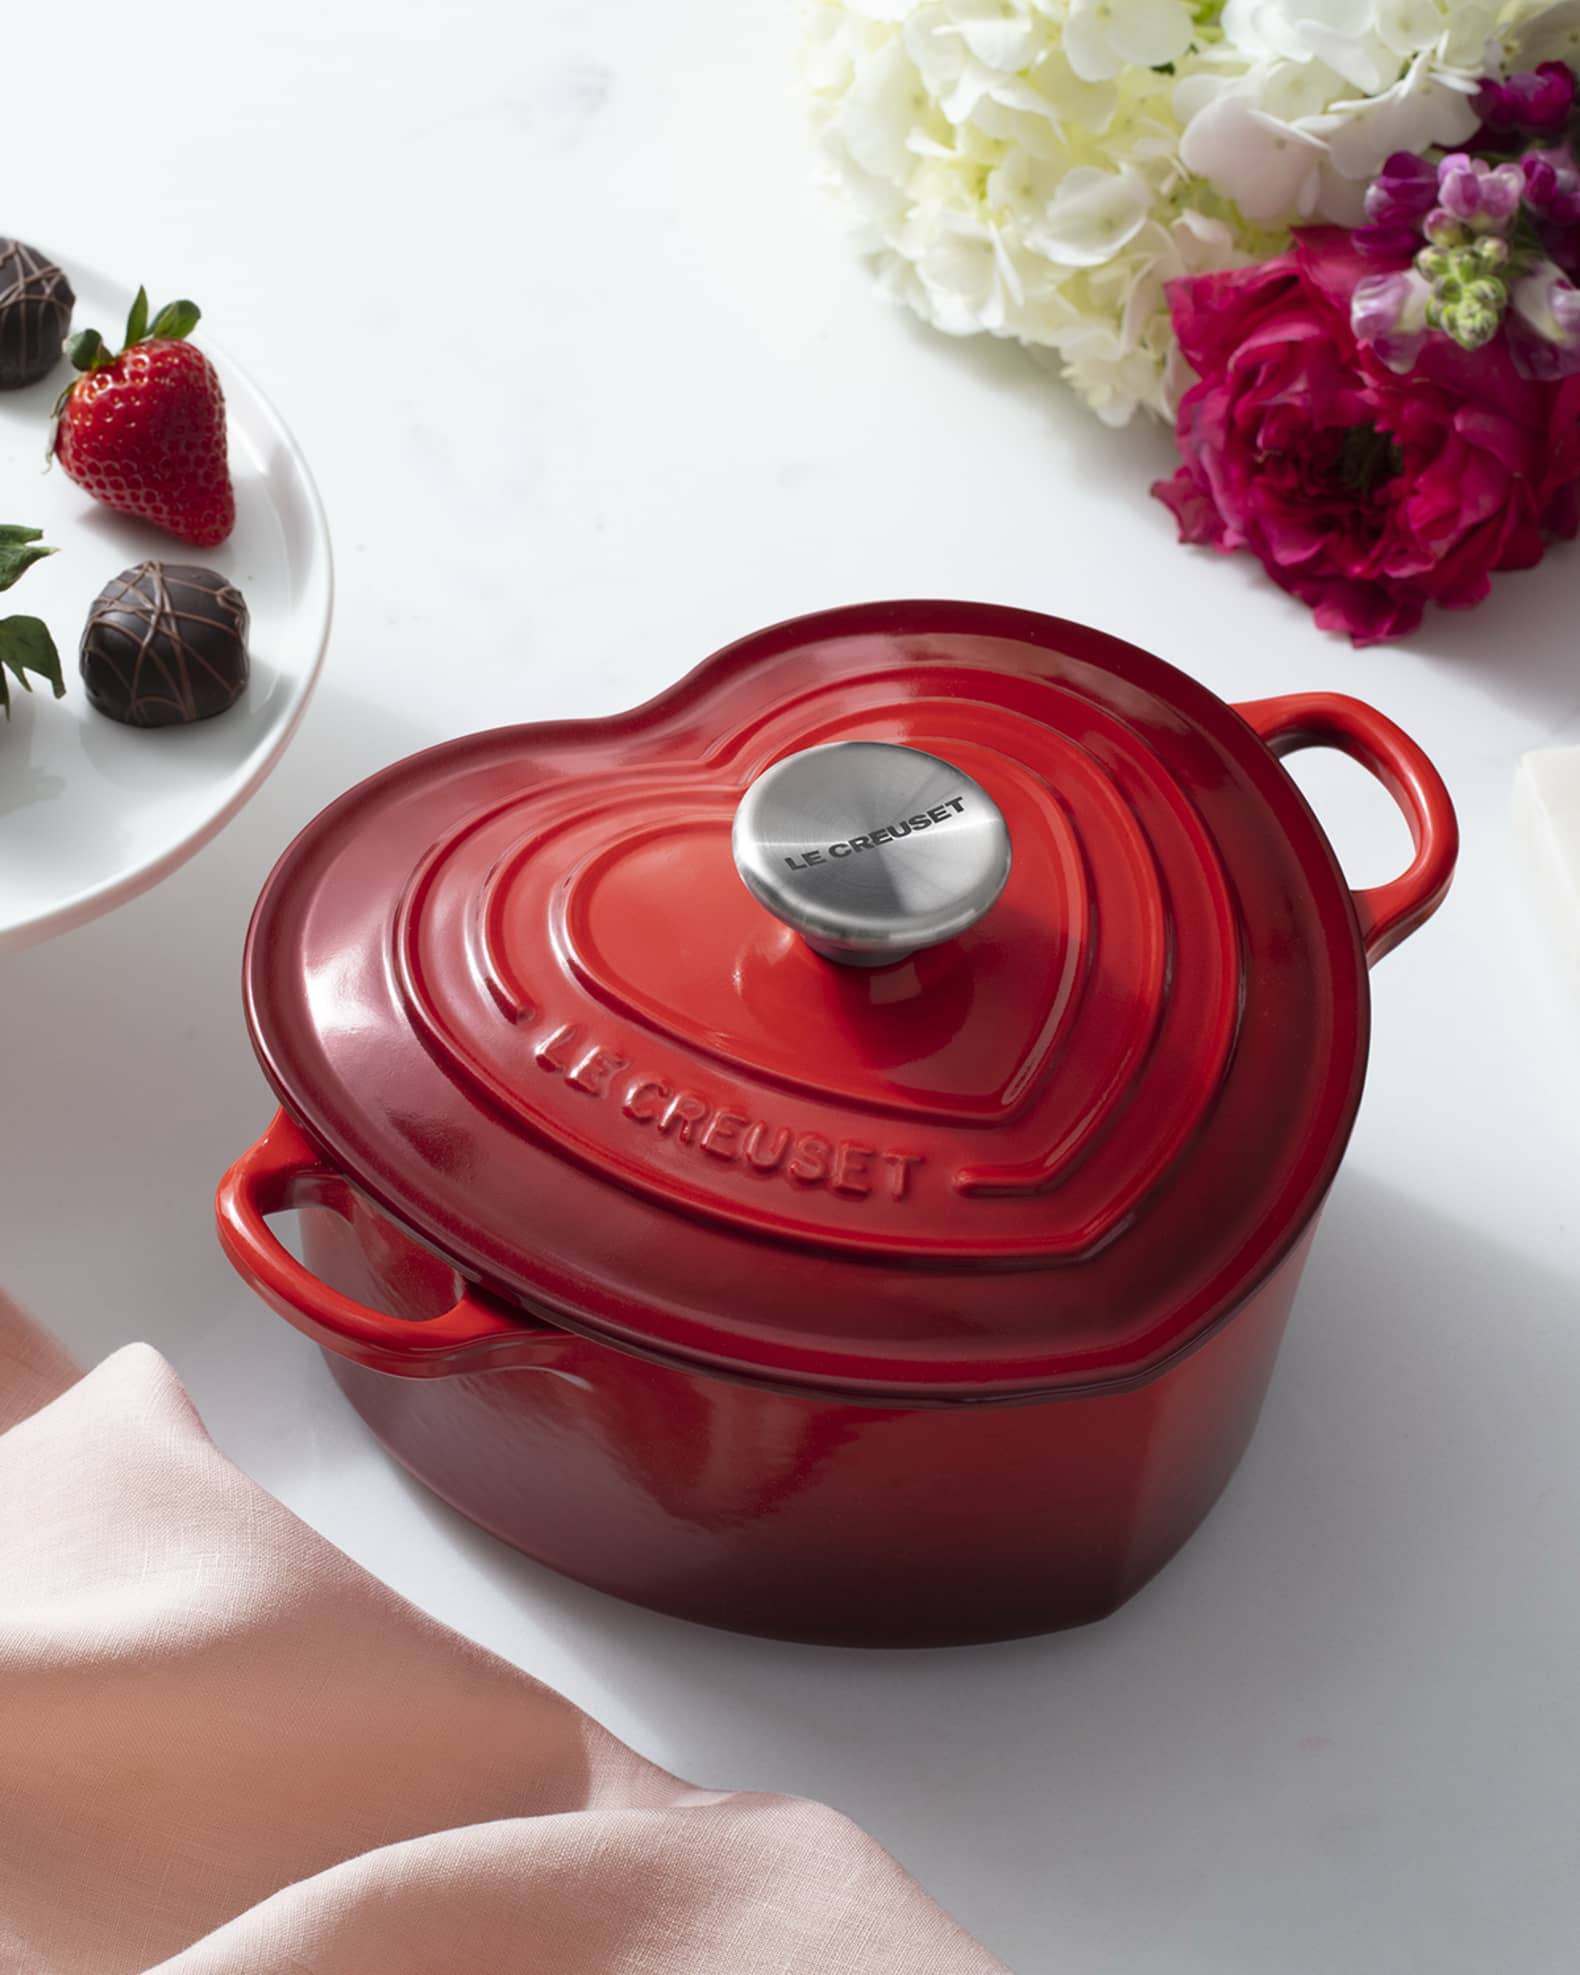 Le Creuset Round Dutch Oven With Heart Knob